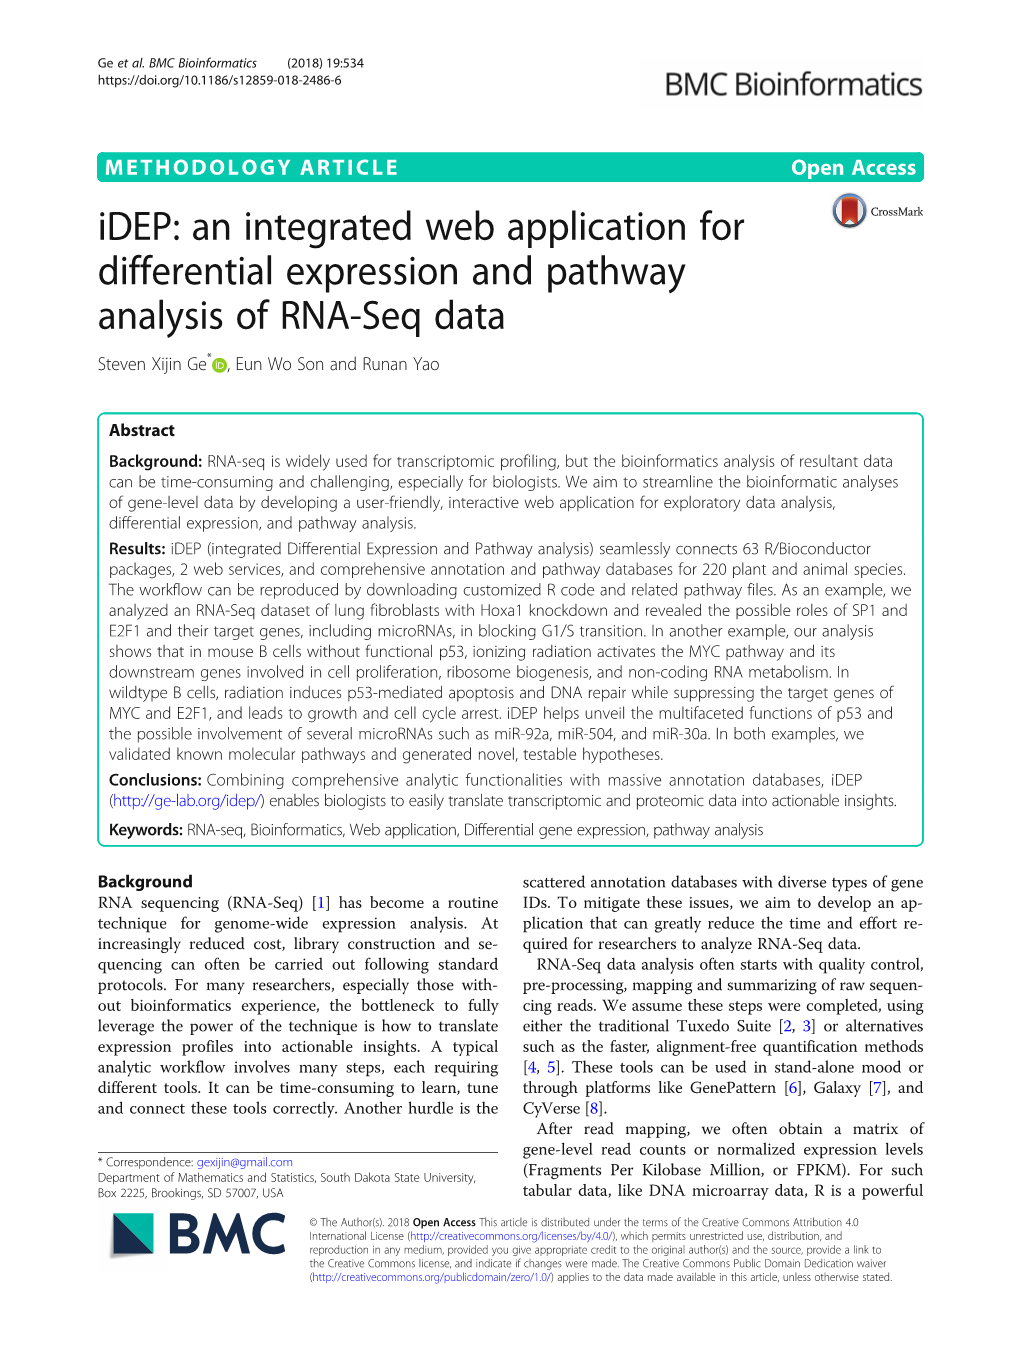 Idep: an Integrated Web Application for Differential Expression and Pathway Analysis of RNA-Seq Data Steven Xijin Ge* , Eun Wo Son and Runan Yao